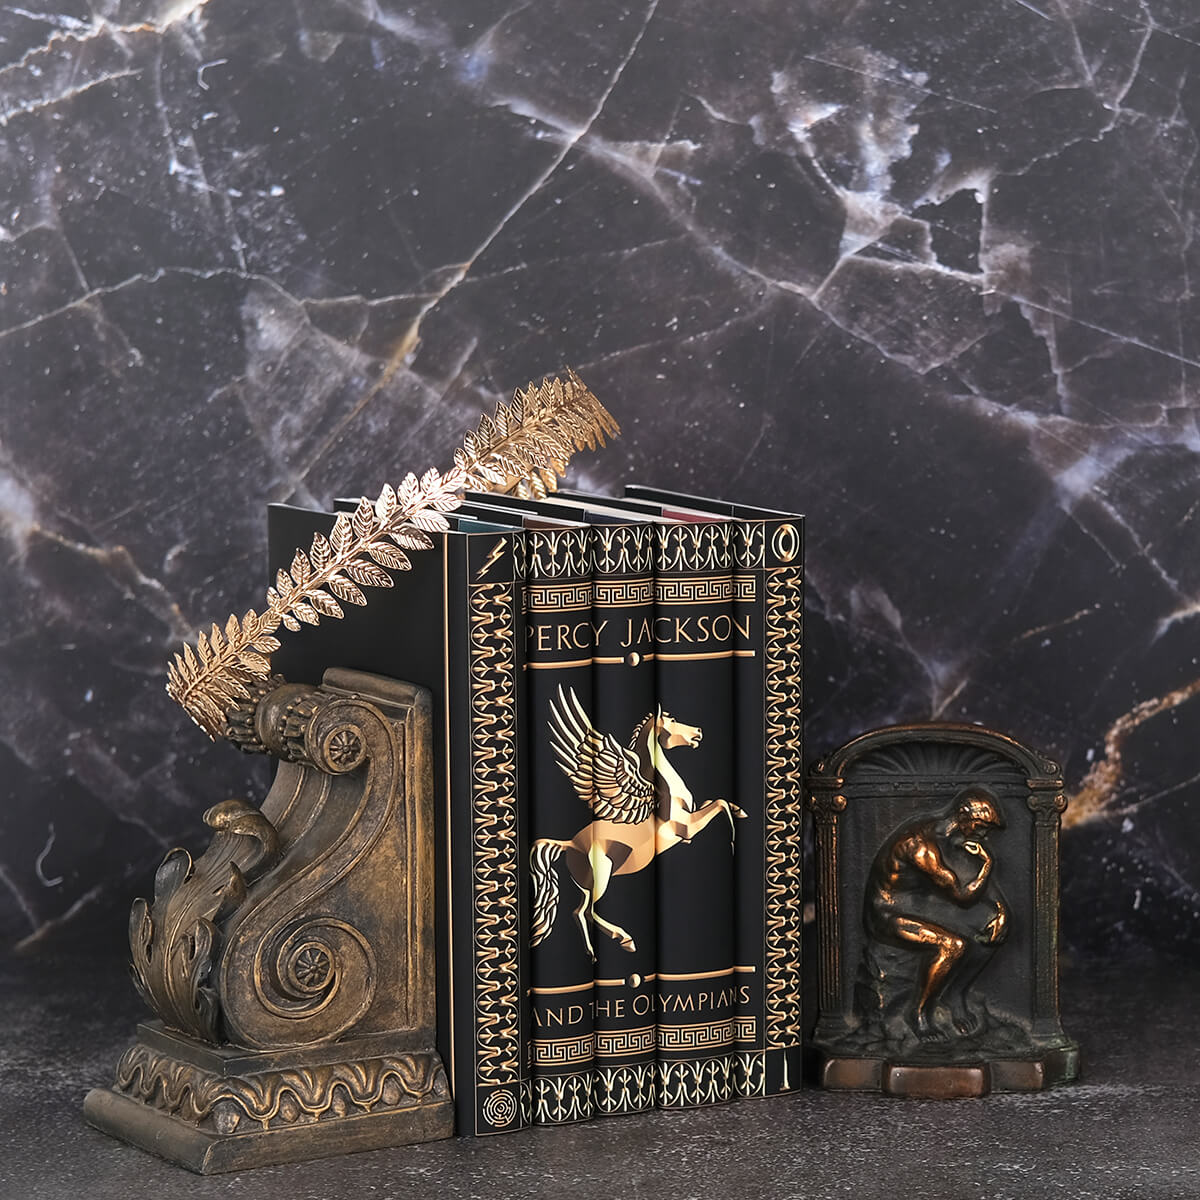 Custom collectible Percy Jackson Legendary Book Set from Juniper Custom sitting against black marble with a gold crown and bronze book ends.